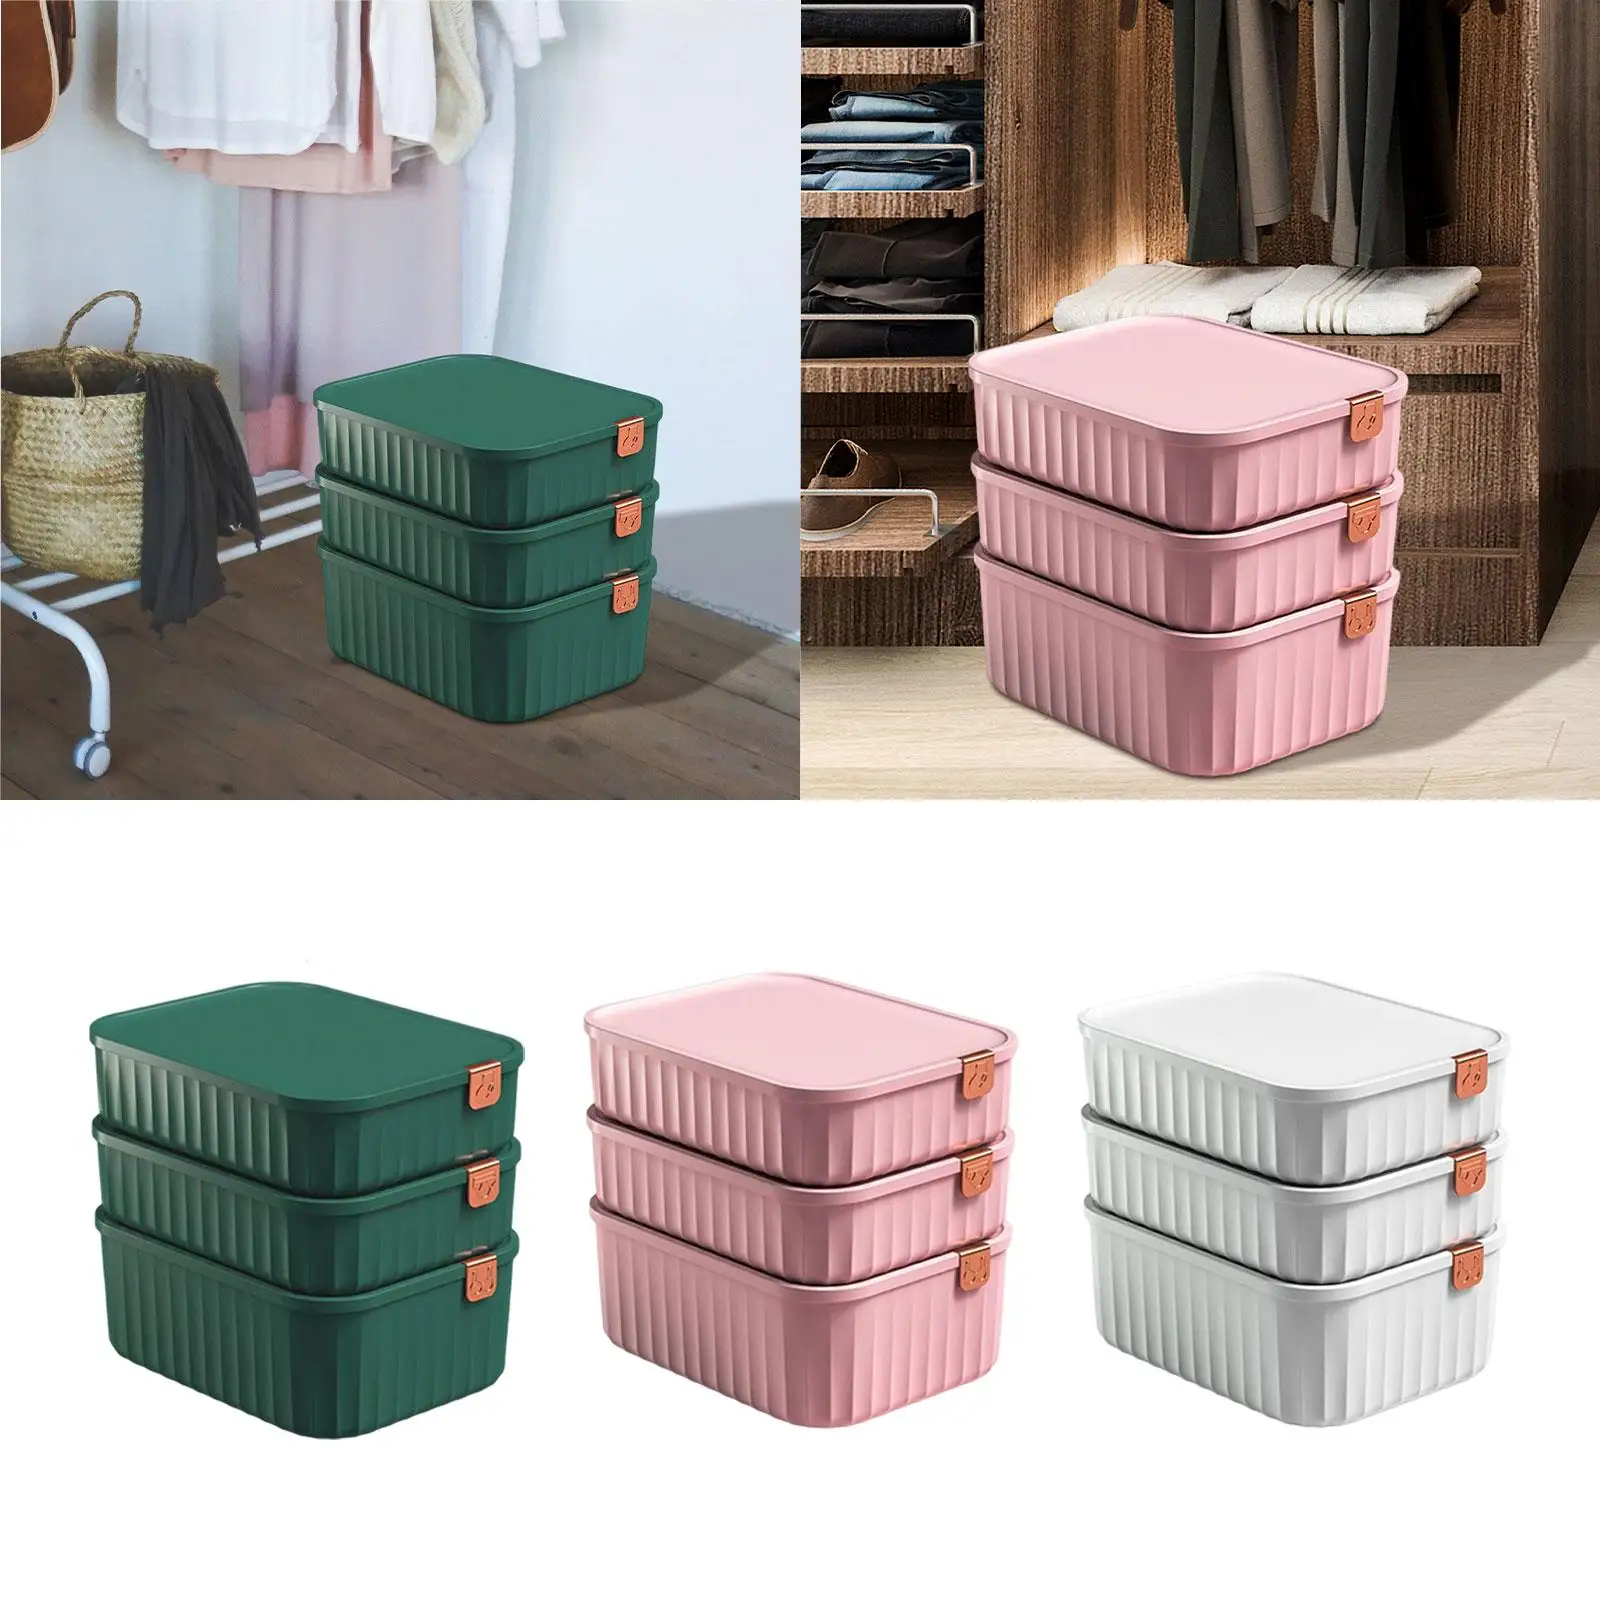 3x Drawer Organizer Leggings Storage Basket Box Compartments Separated Container Closet Storage Boxes Clothes Ties Bra Organizer